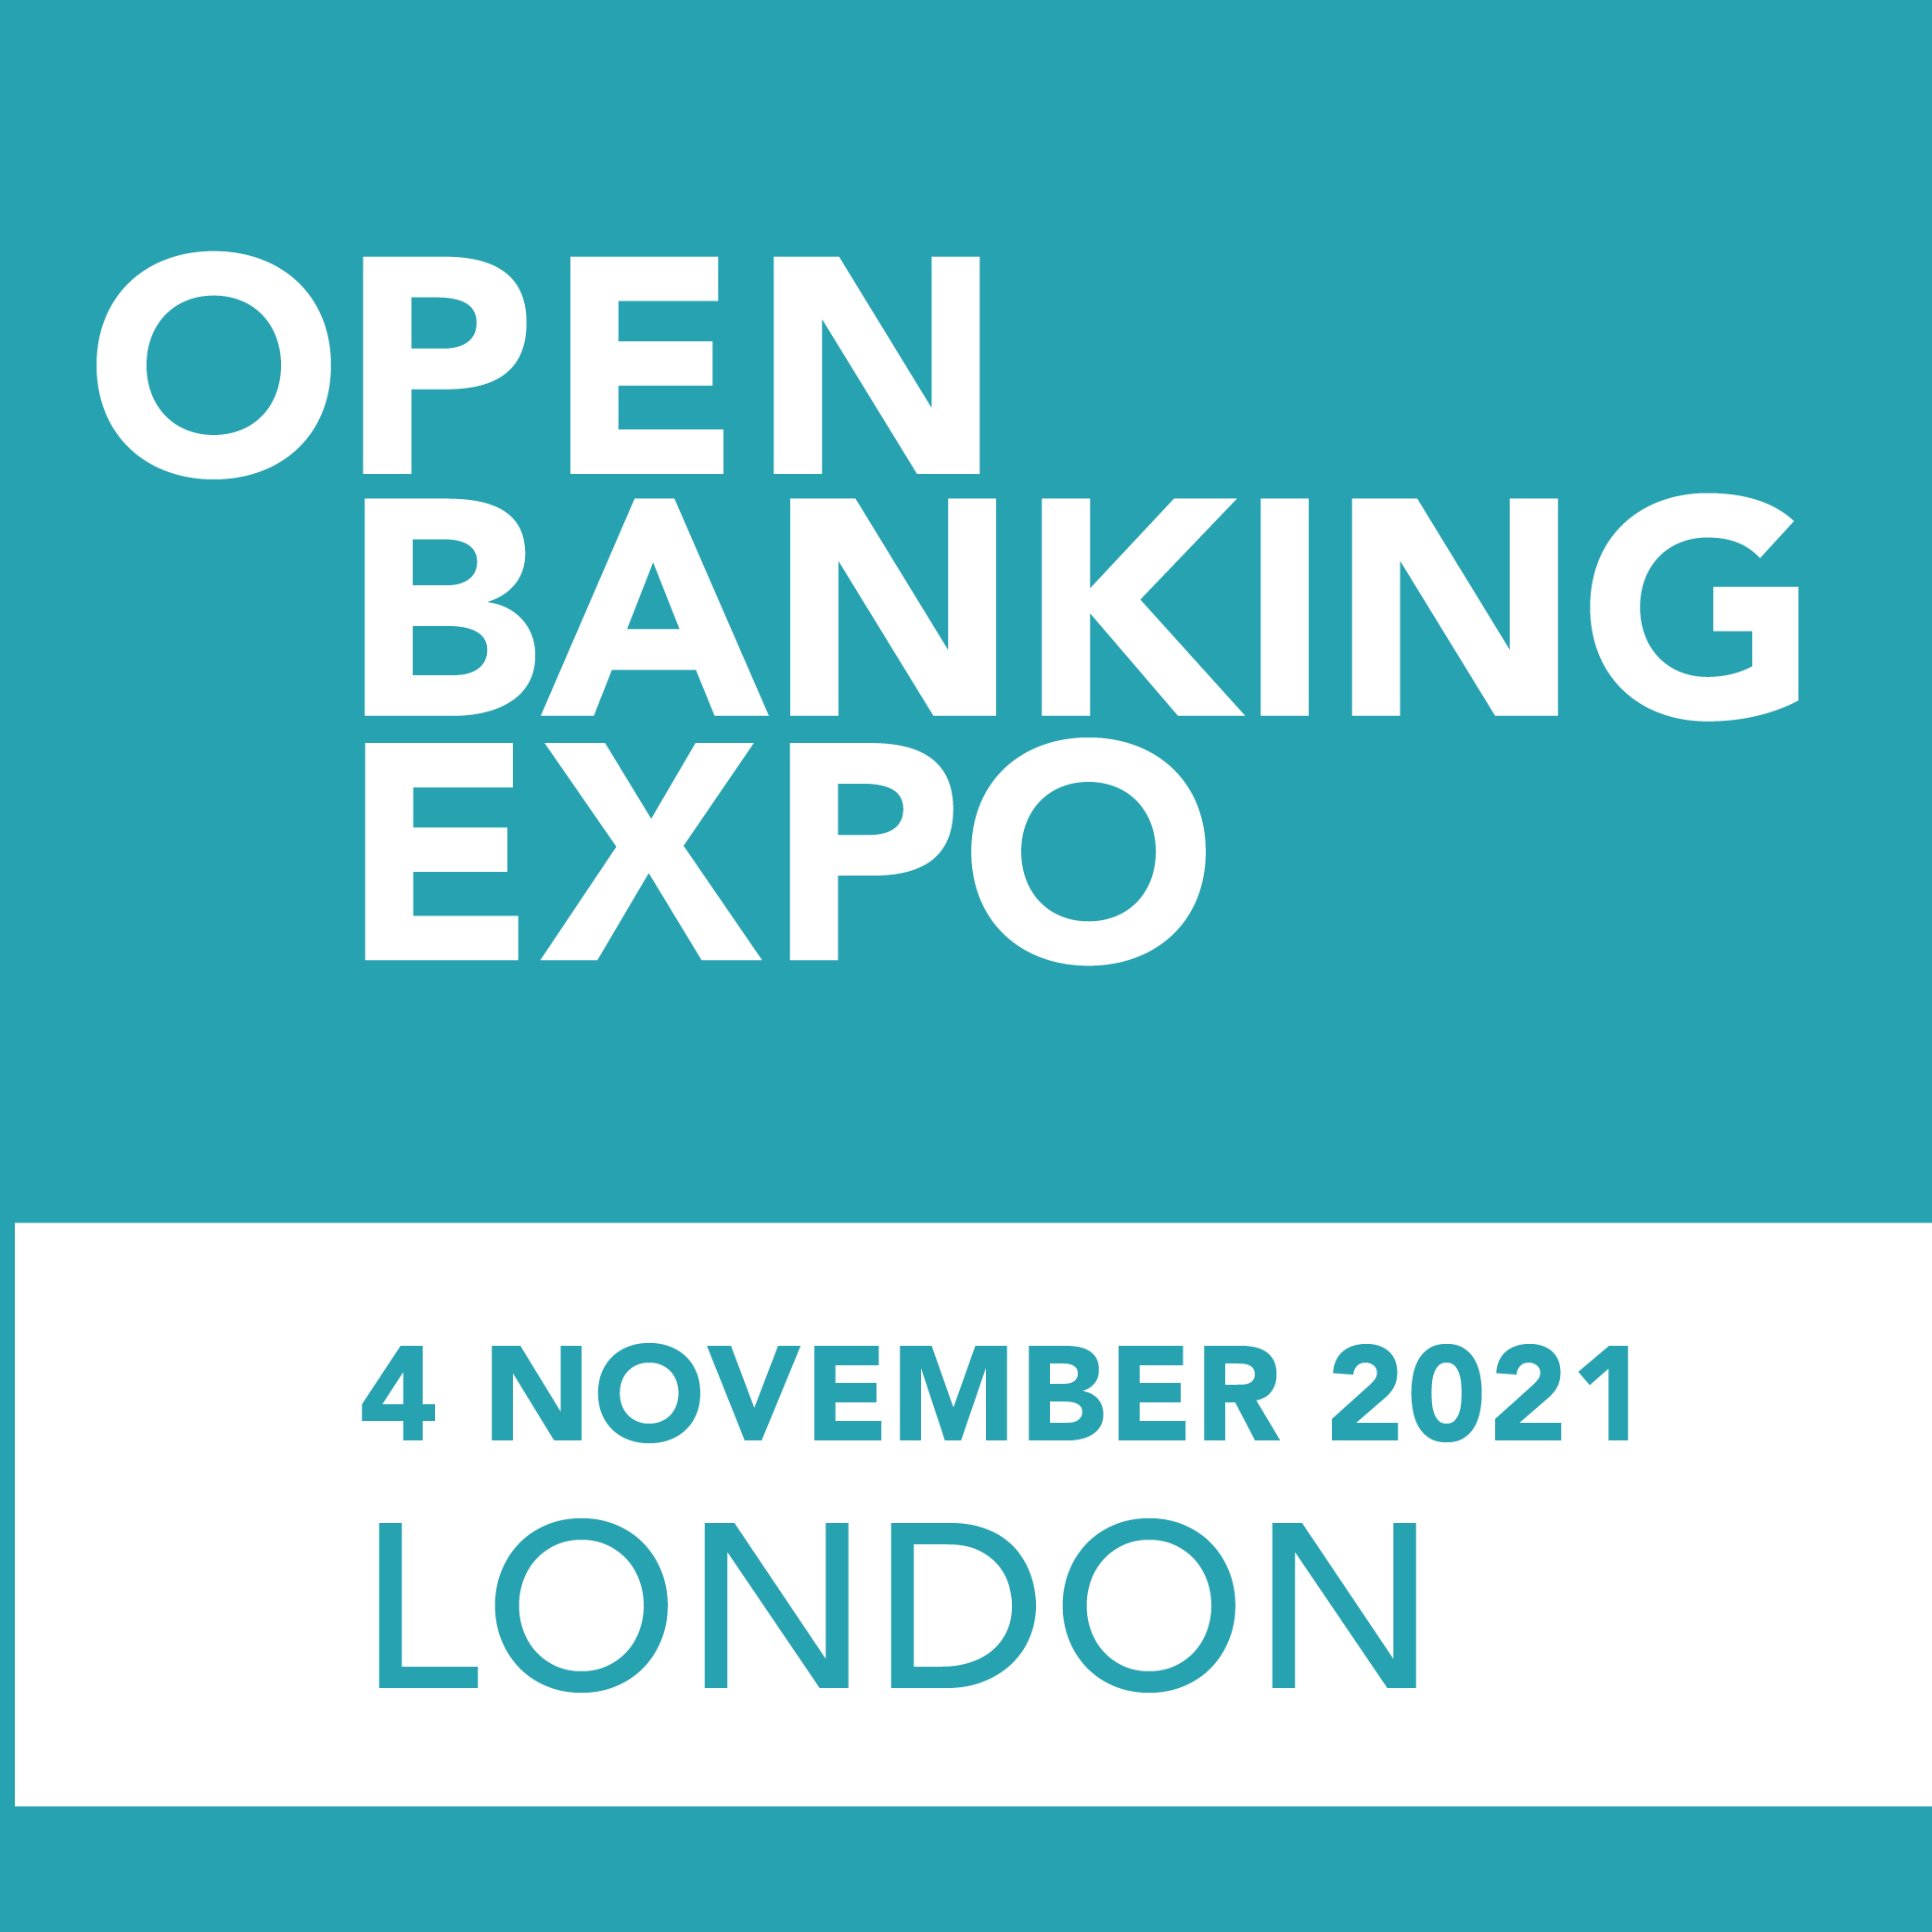 Open Banking Expo UK 2021 organized by Open Banking Expo